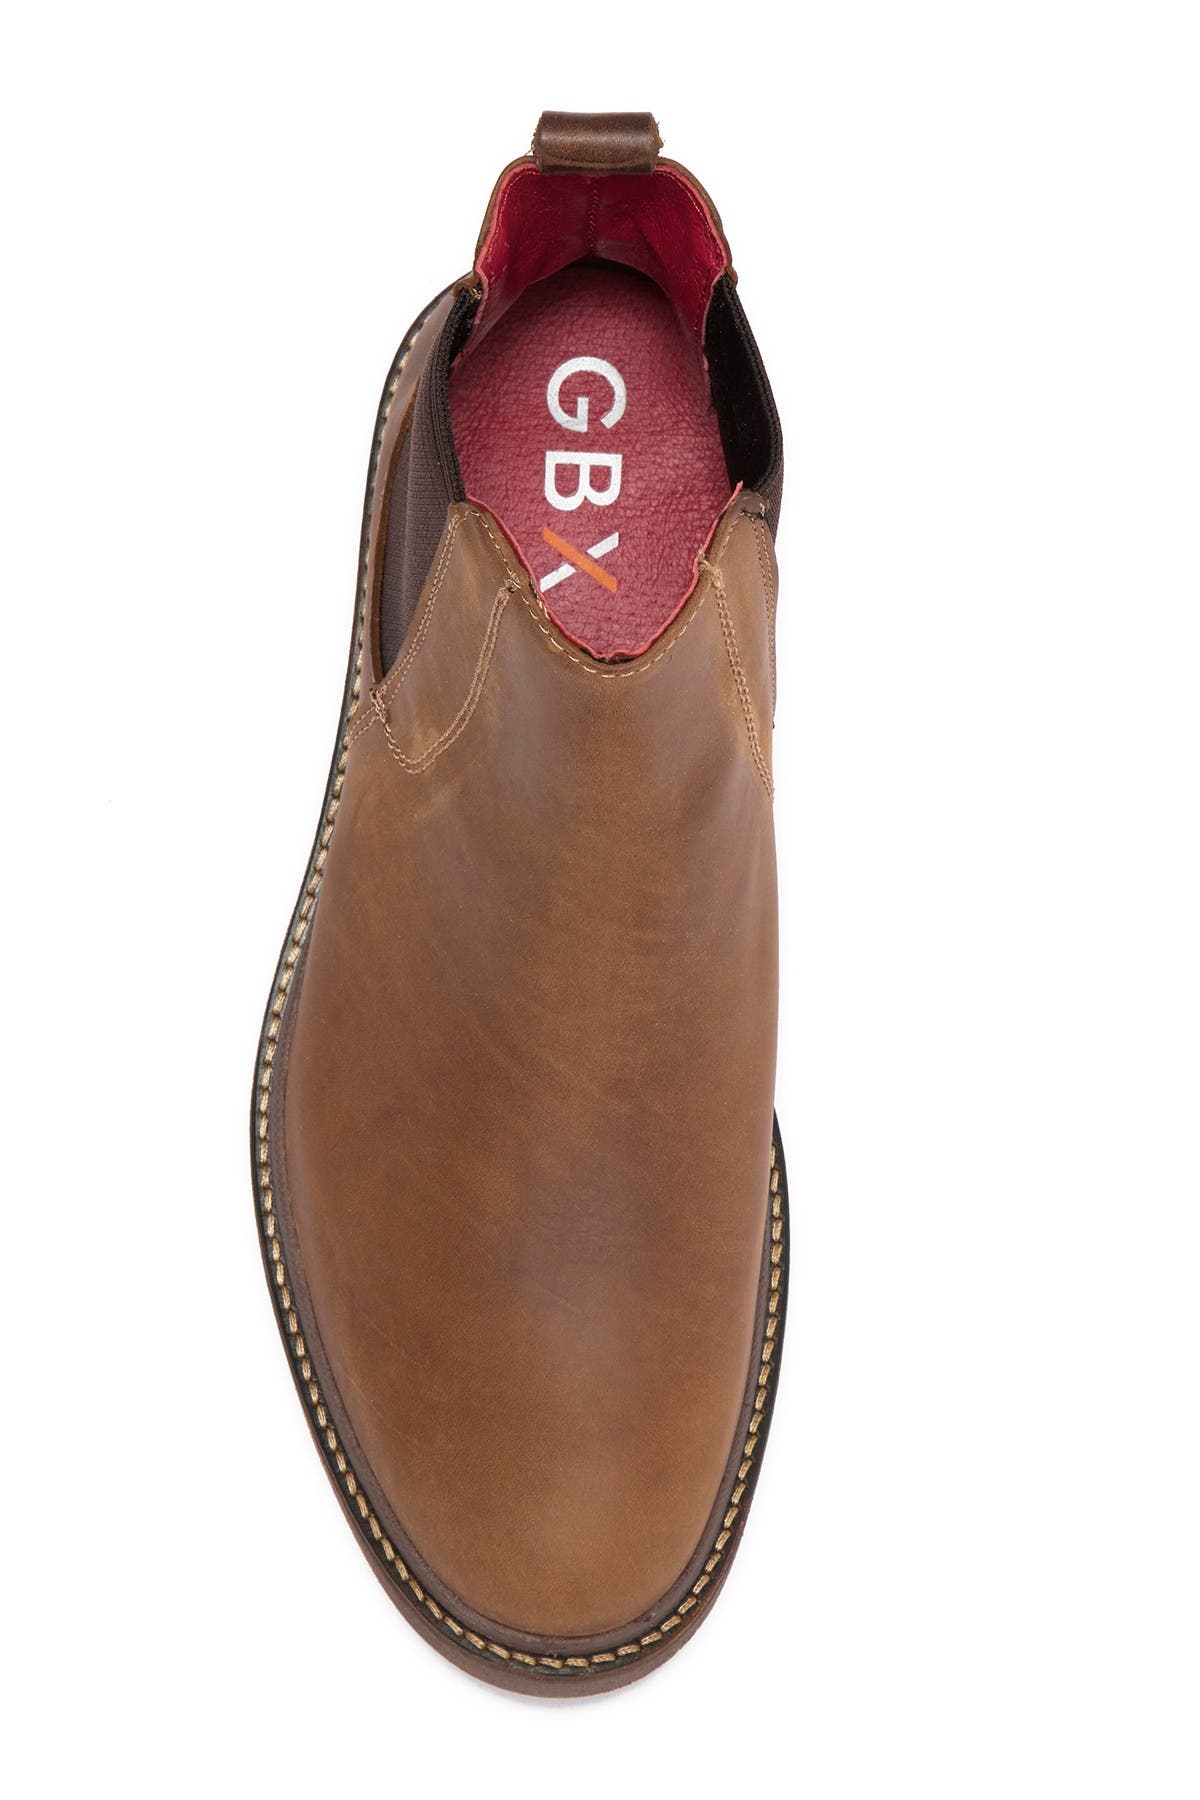 GBX | Panther Leather Chelsea Boot 